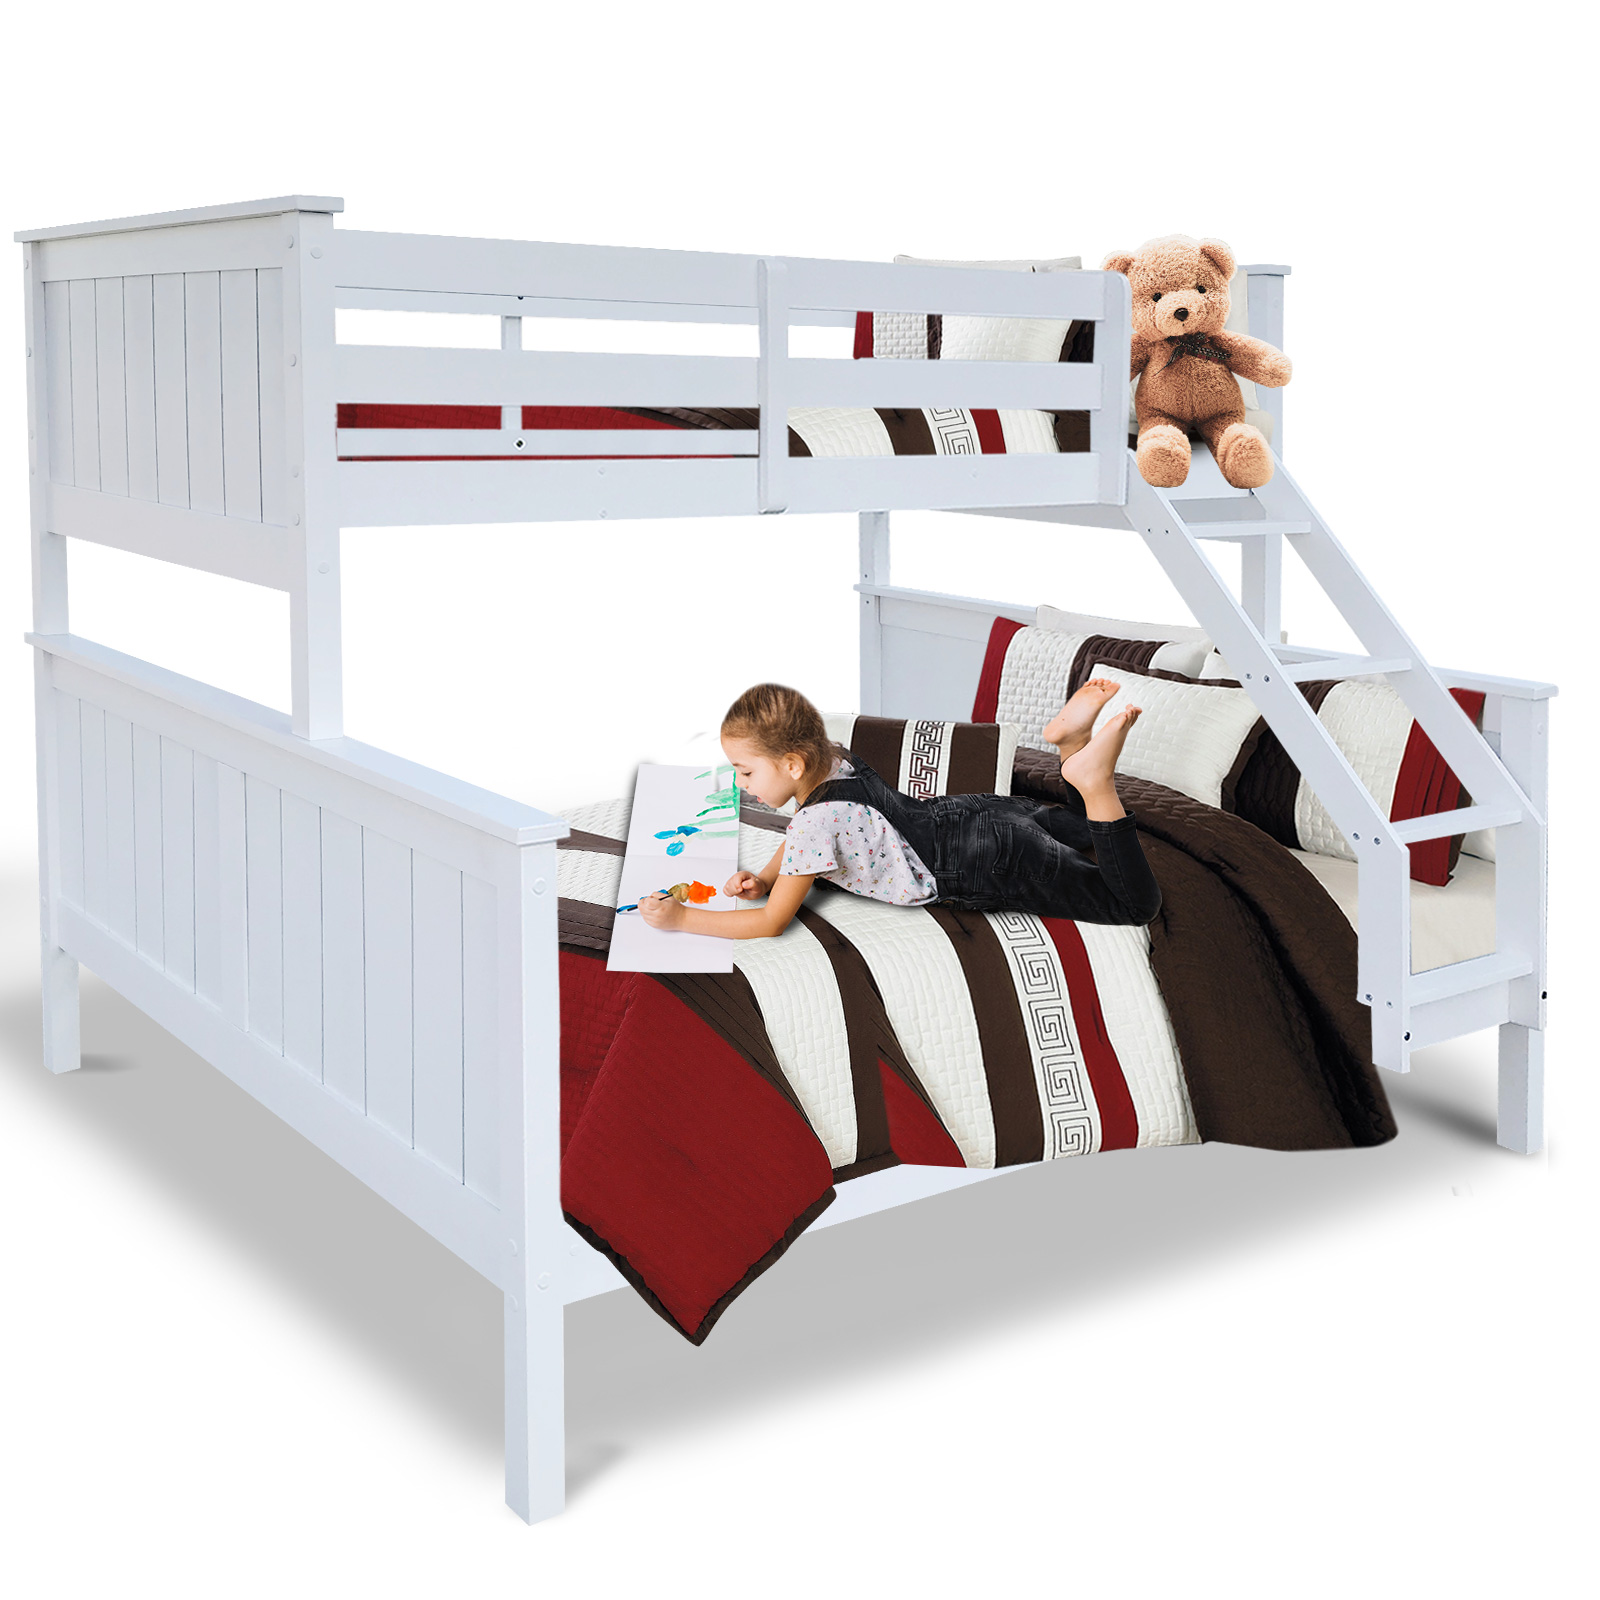 Single Over Double Bunk Bed With, Double Bunk Beds With Mattress